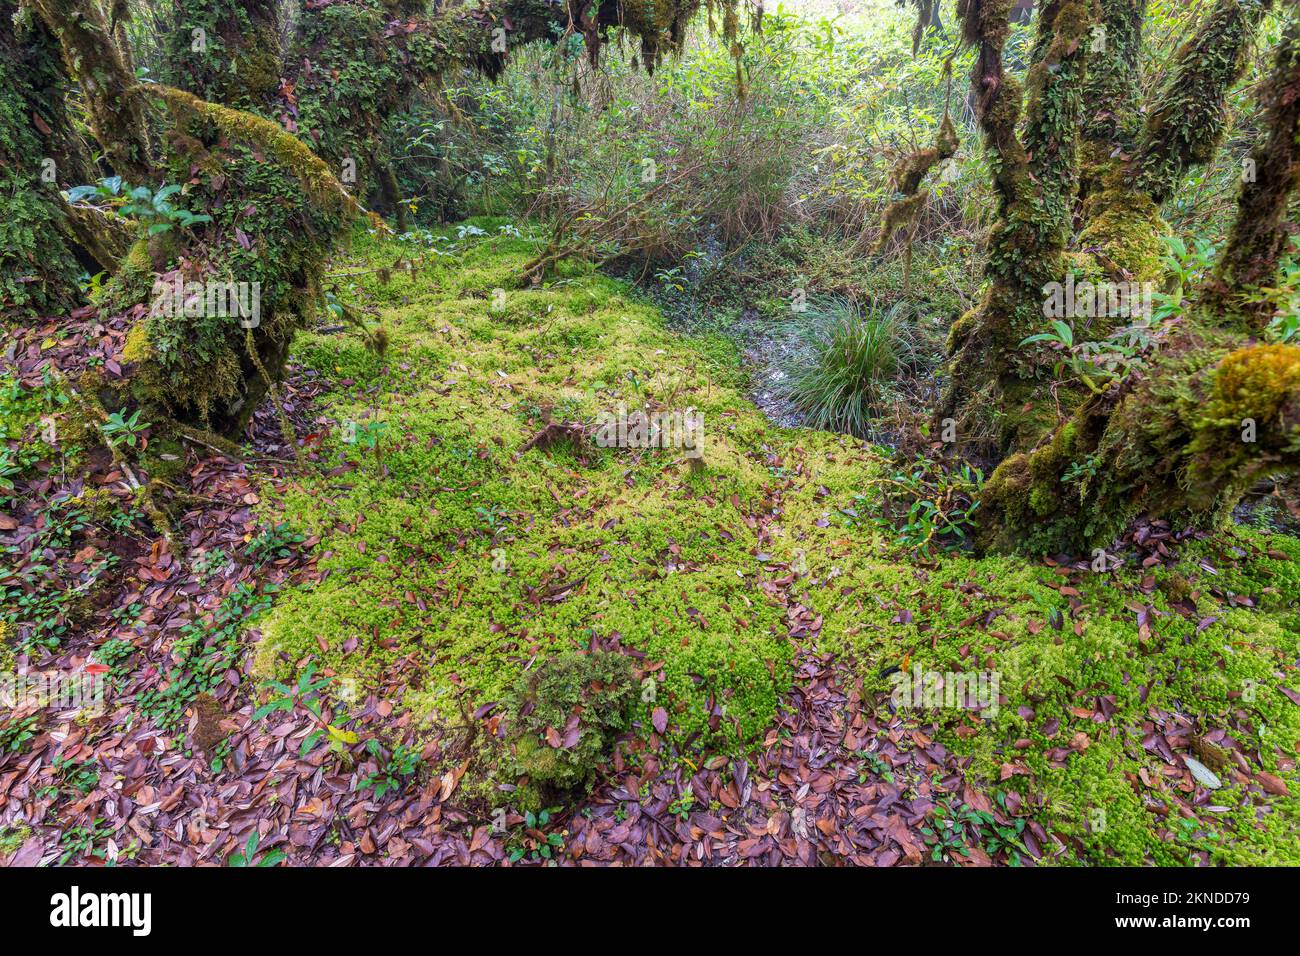 Sphagnum moss in Ang Ka Luang Nature Trail is an educational nature trail inside a rainforest on the peak of Doi Inthanon National Park in Chiang Mai, Stock Photo